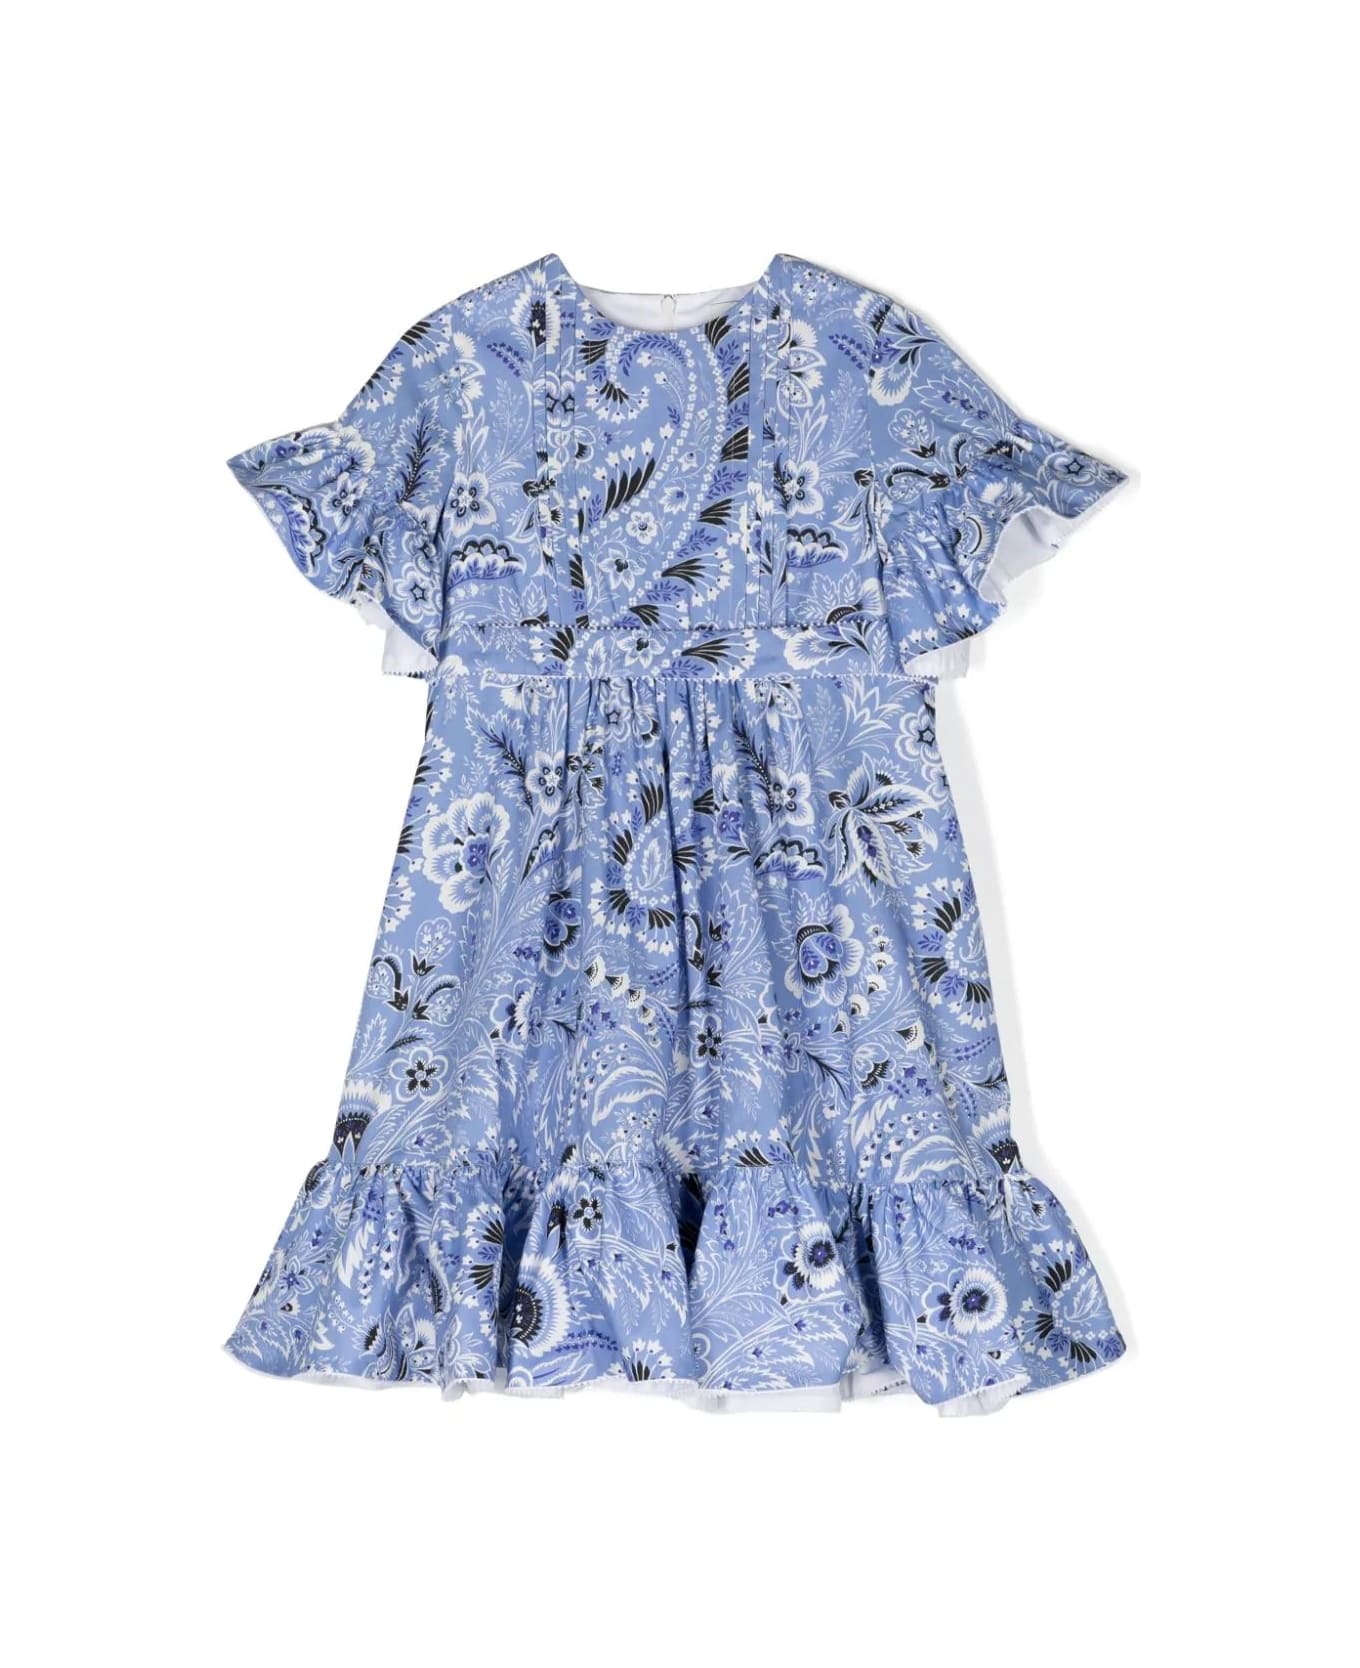 Etro Light Blue Dress With Ruffles And Paisley Print - Blue